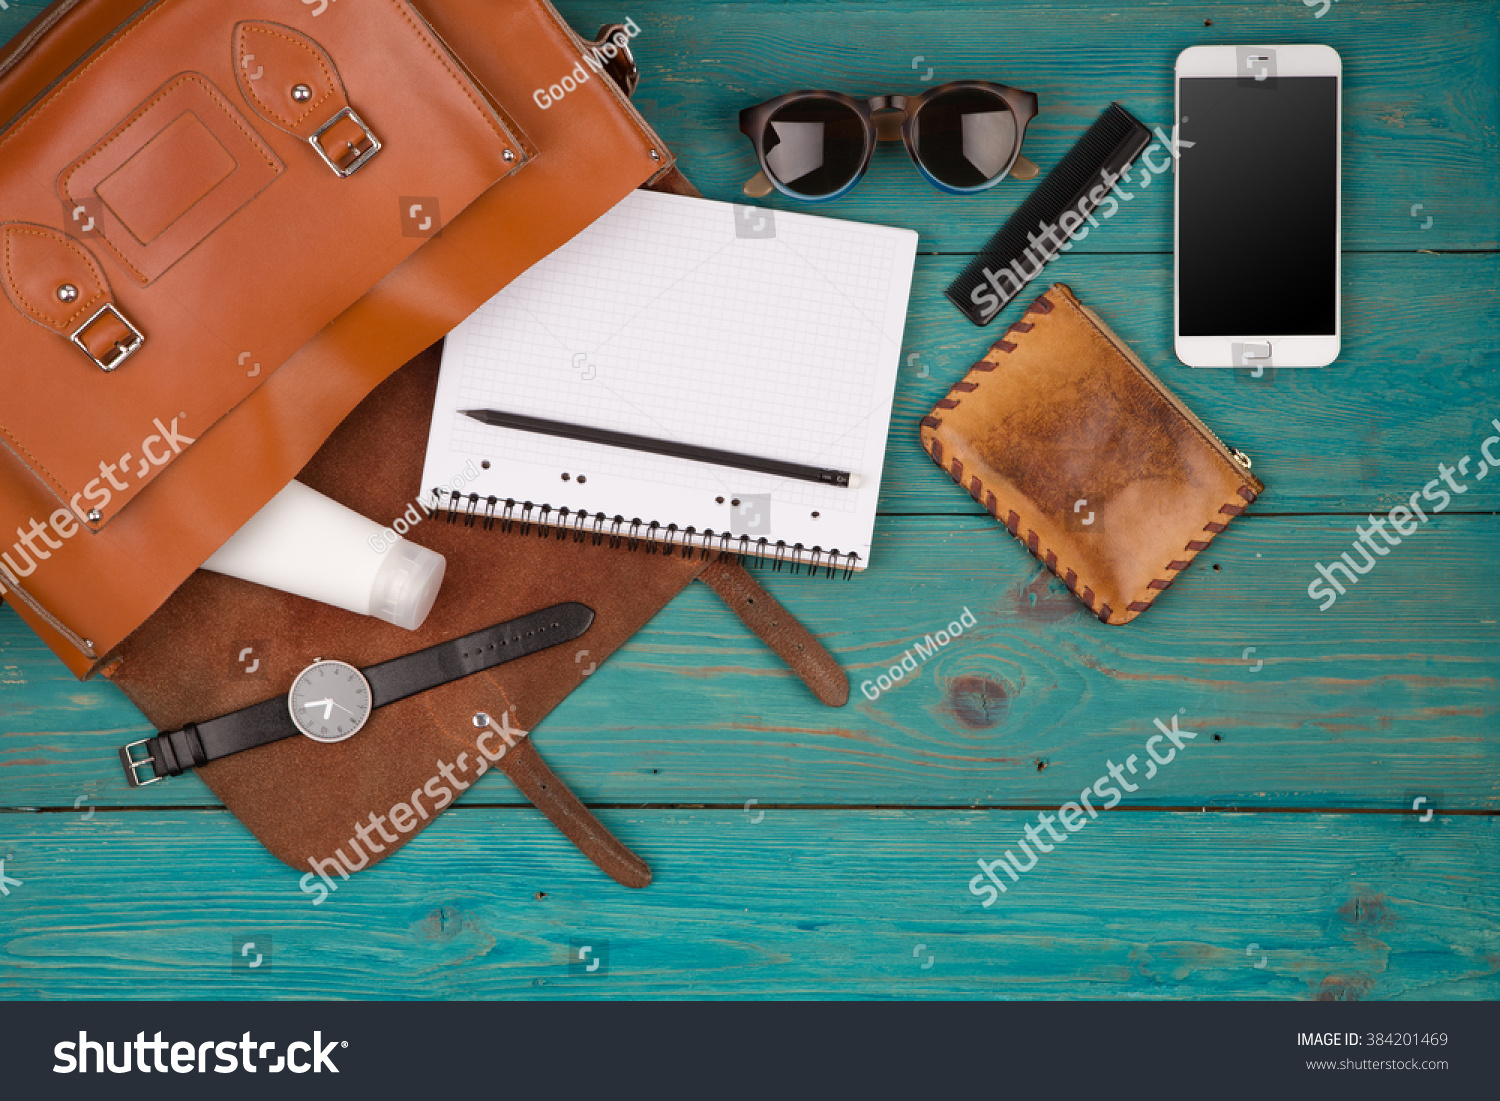 Travel concept - women set with bag with phone, notepad, purse, watch, glasses on blue wooden background. Top view #384201469